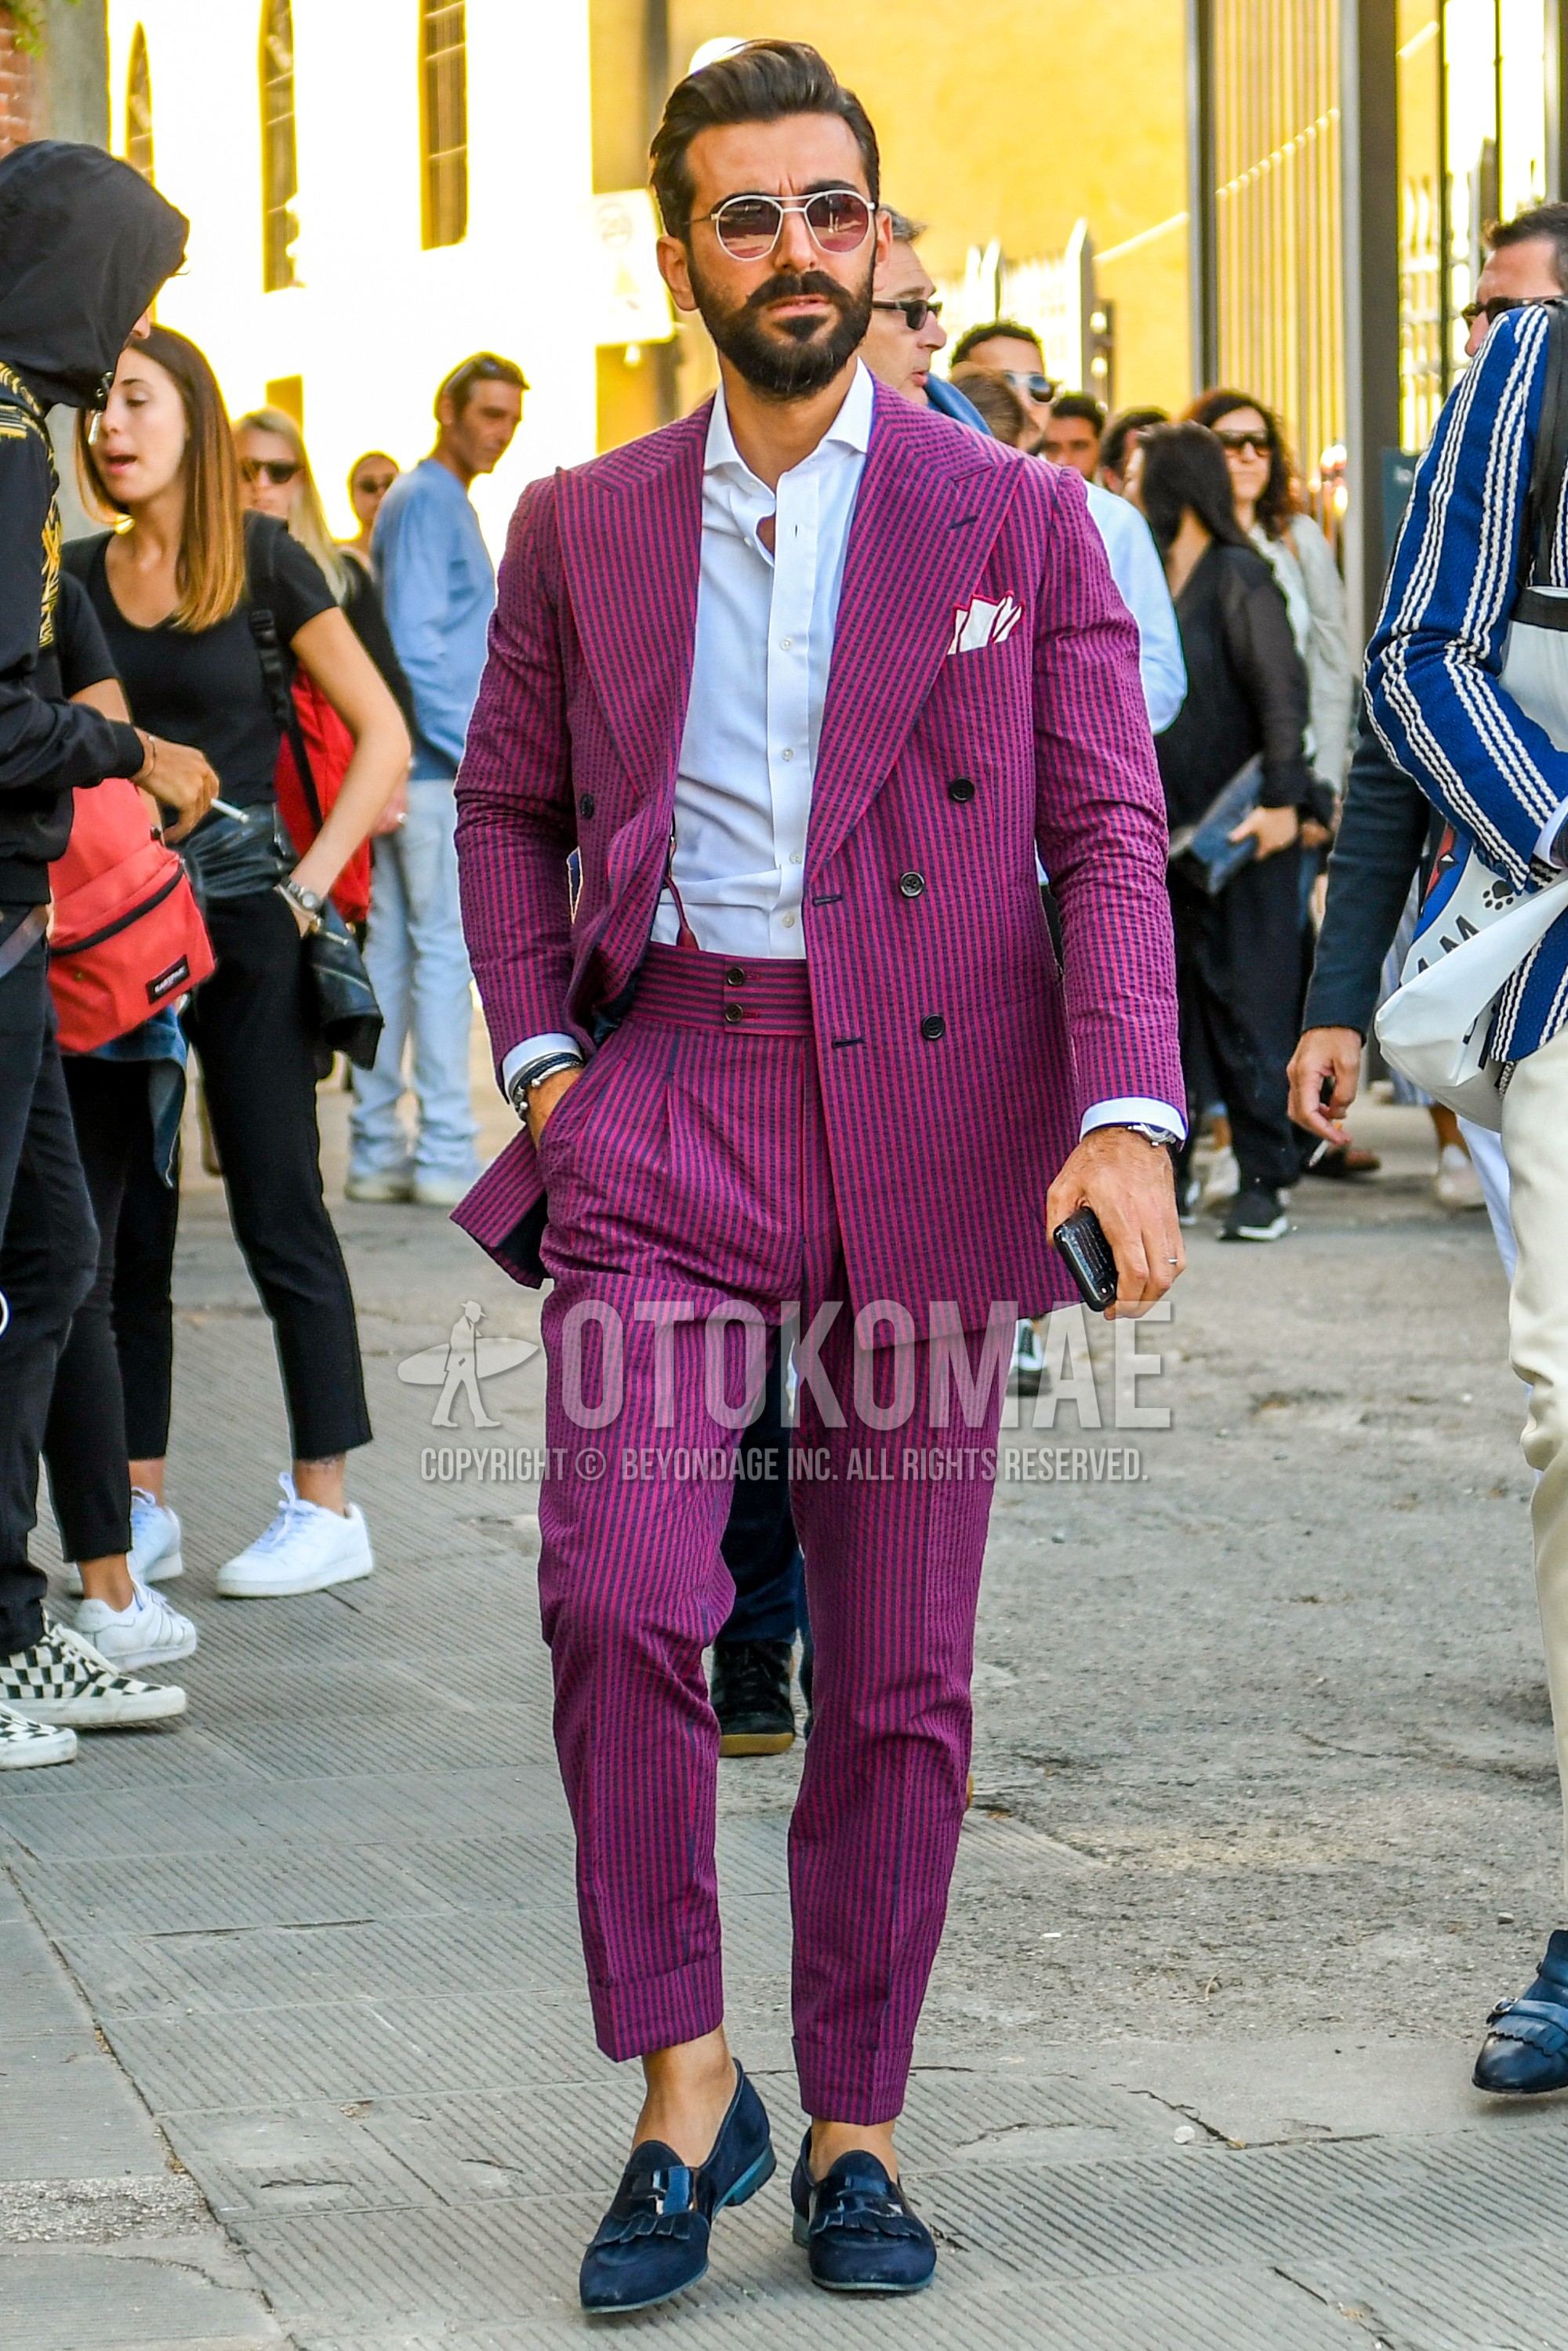 Men's spring summer autumn outfit with plain sunglasses, white plain shirt, navy  loafers leather shoes, suede shoes leather shoes, purple black stripes suit.